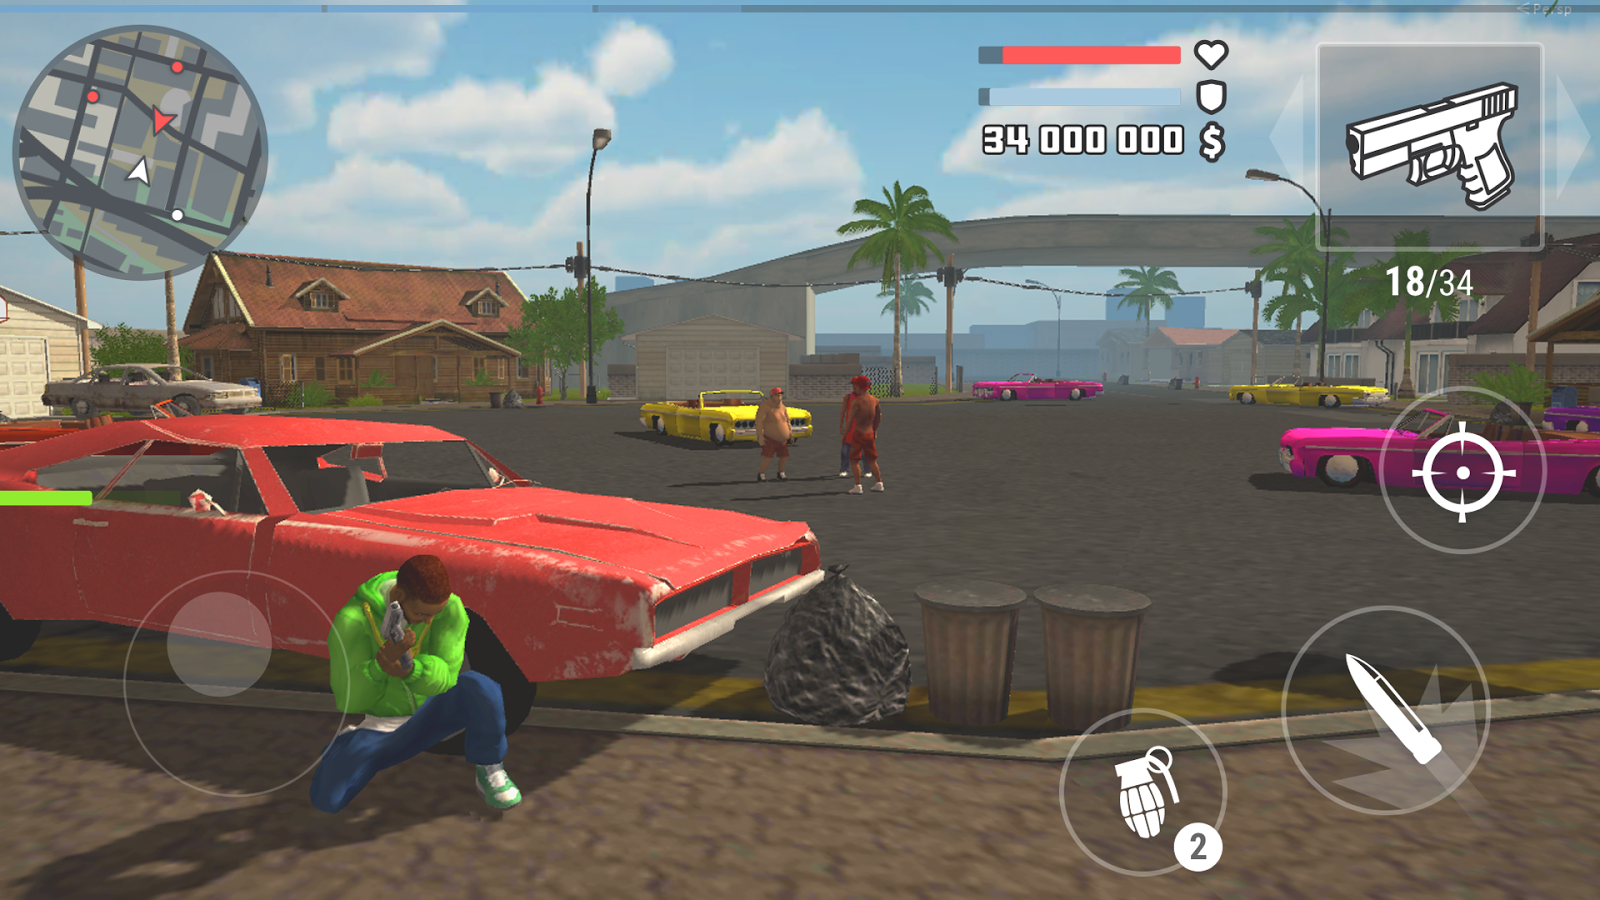 Gta 5 mobile android skachat фото 113